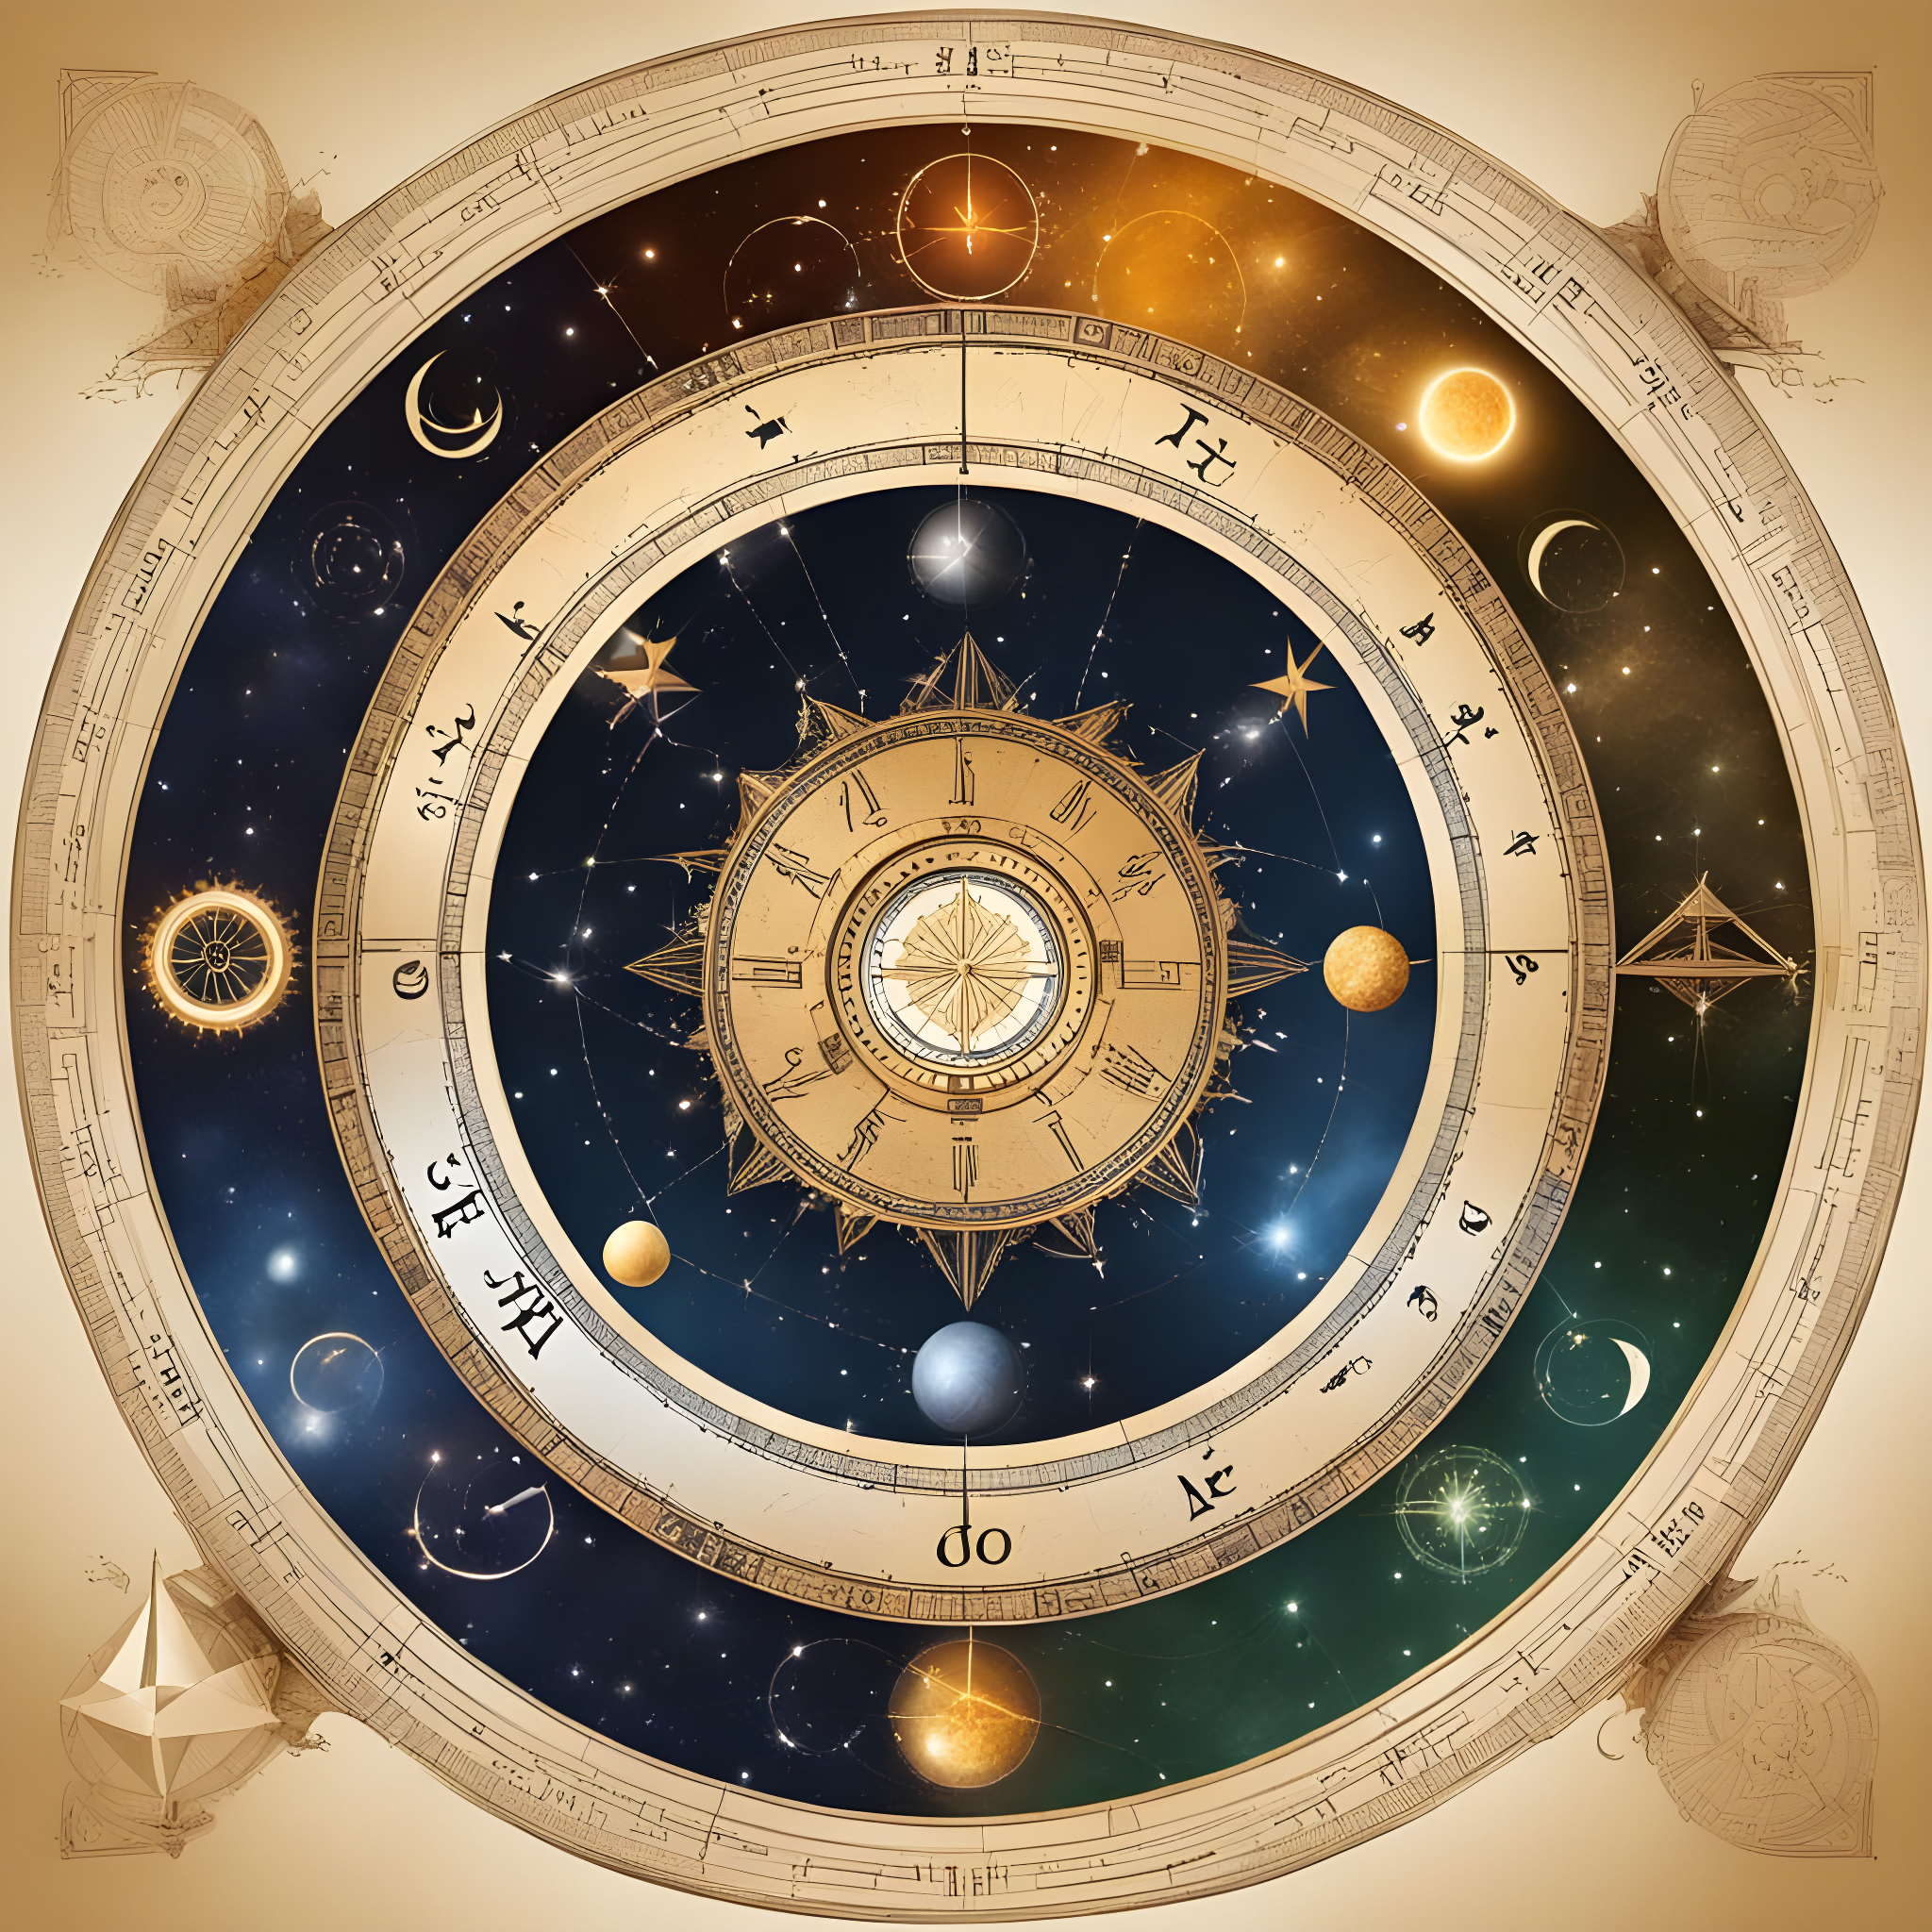 An image showcasing the harmonious integration of Numerology and Astrology, incorporating symbolism from both systems to illustrate their seamless collaboration.